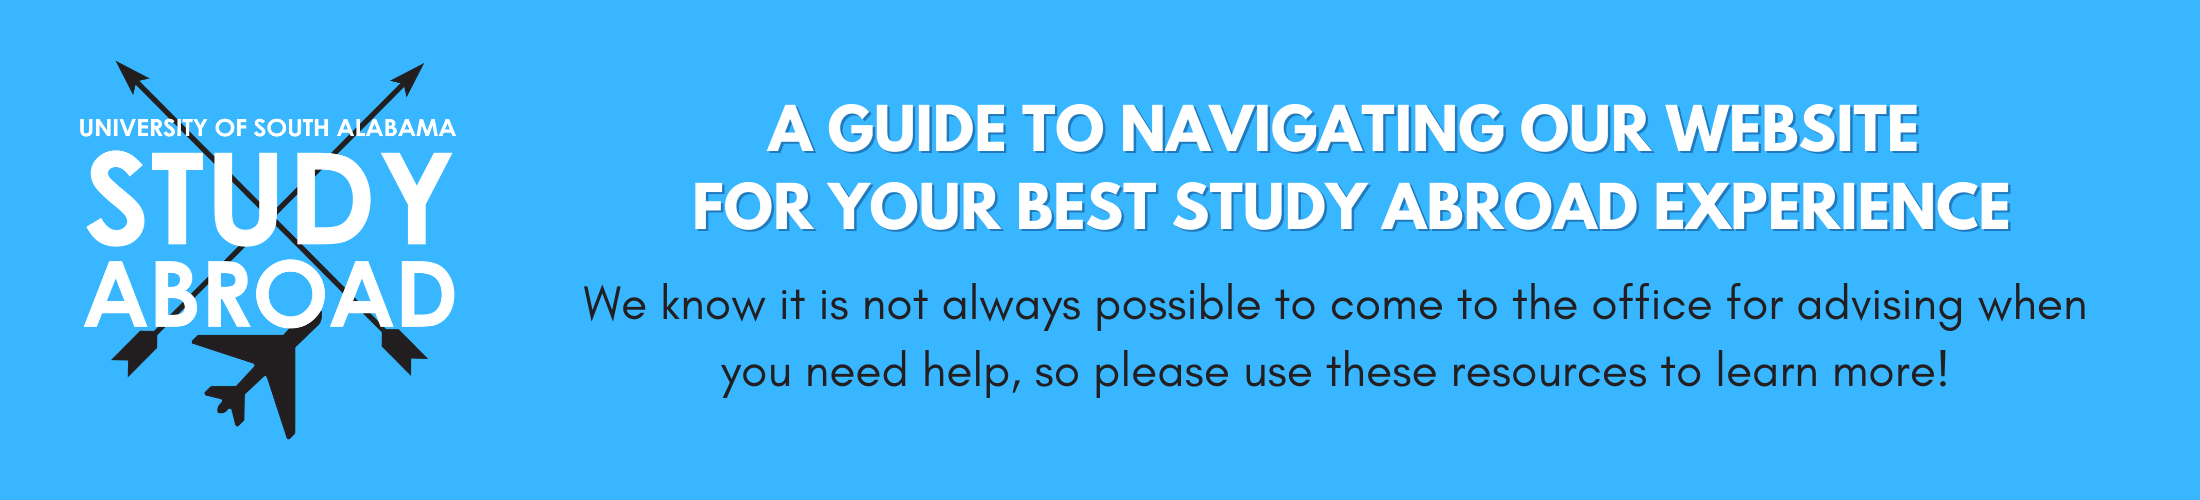 A guide to navigating our website for your best study abroad experience. We know it is not always possible to come to the office for advising when you need help, so please use these resources to learn more!